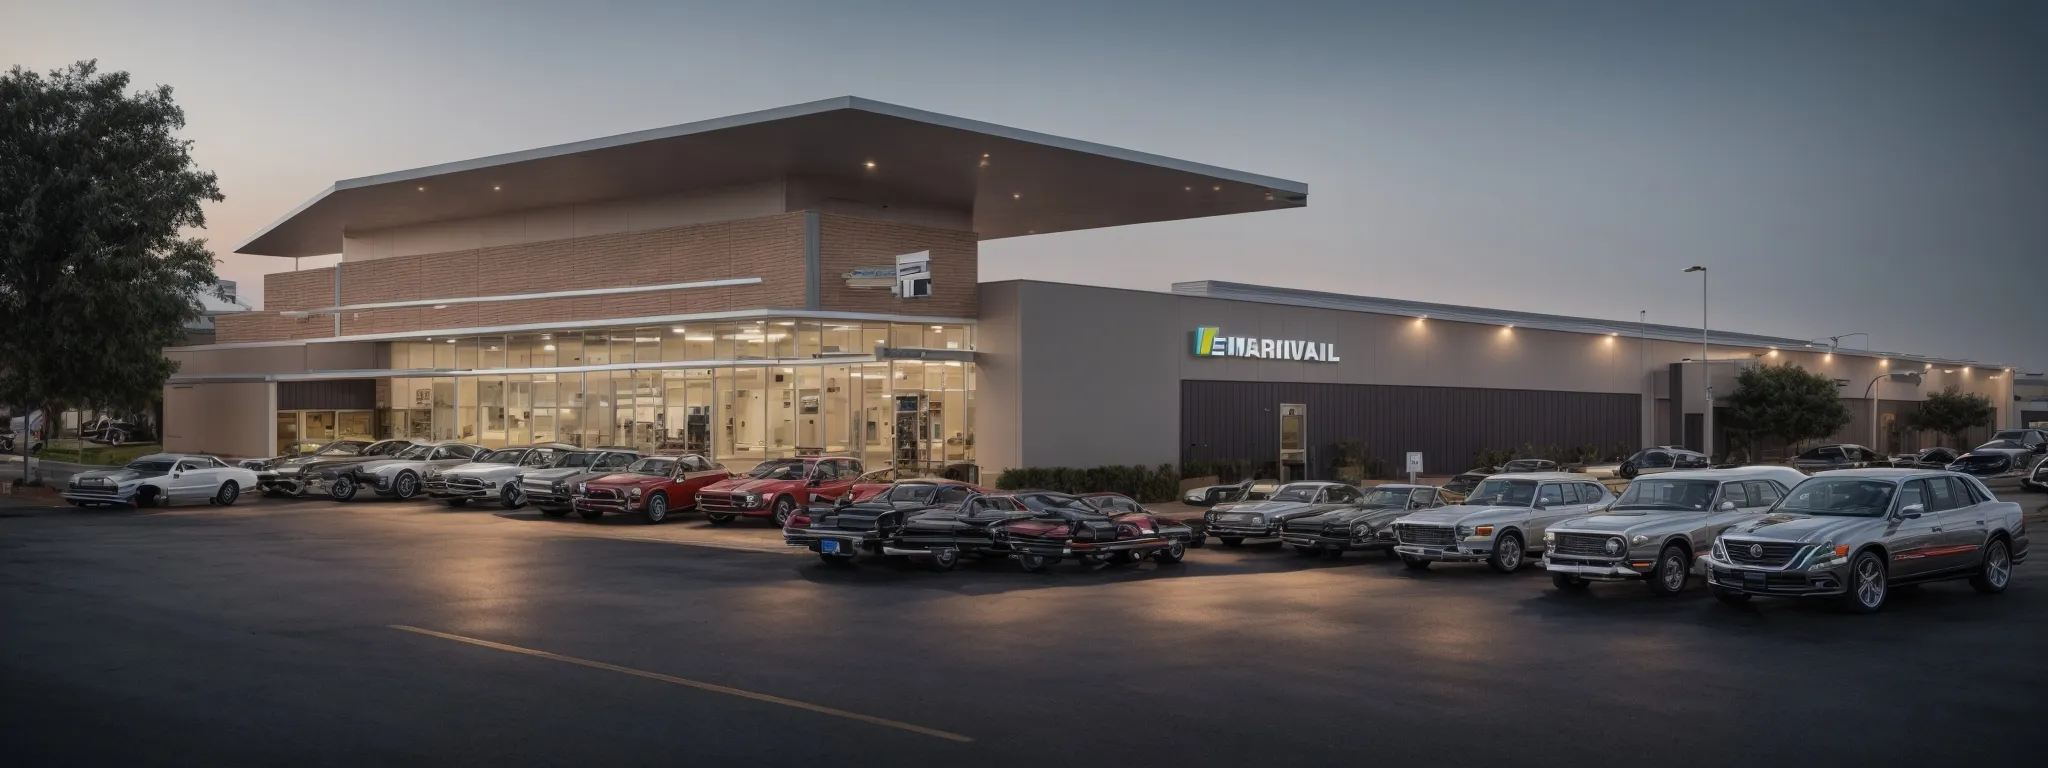 a car dealership with an array of vehicles and welcoming entrance, devoid of any discernible branding or text, embodies a hub for local automotive commerce.